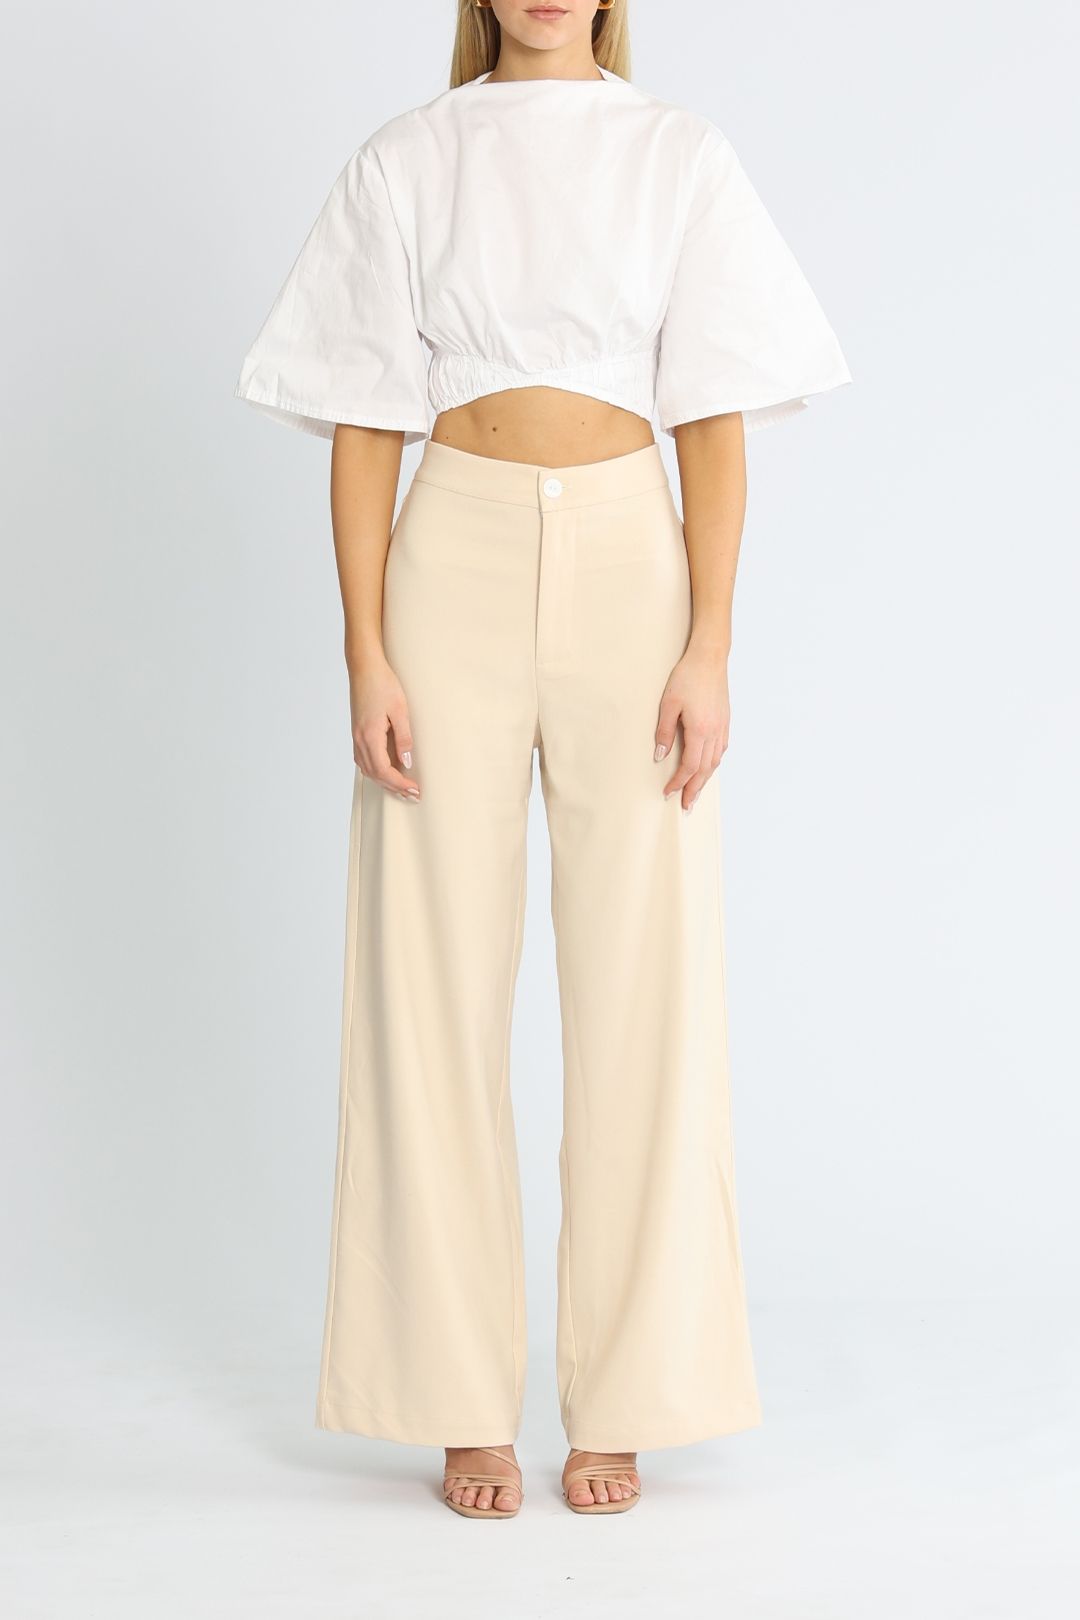 Staple The Label Ana Wide Leg Pant nude